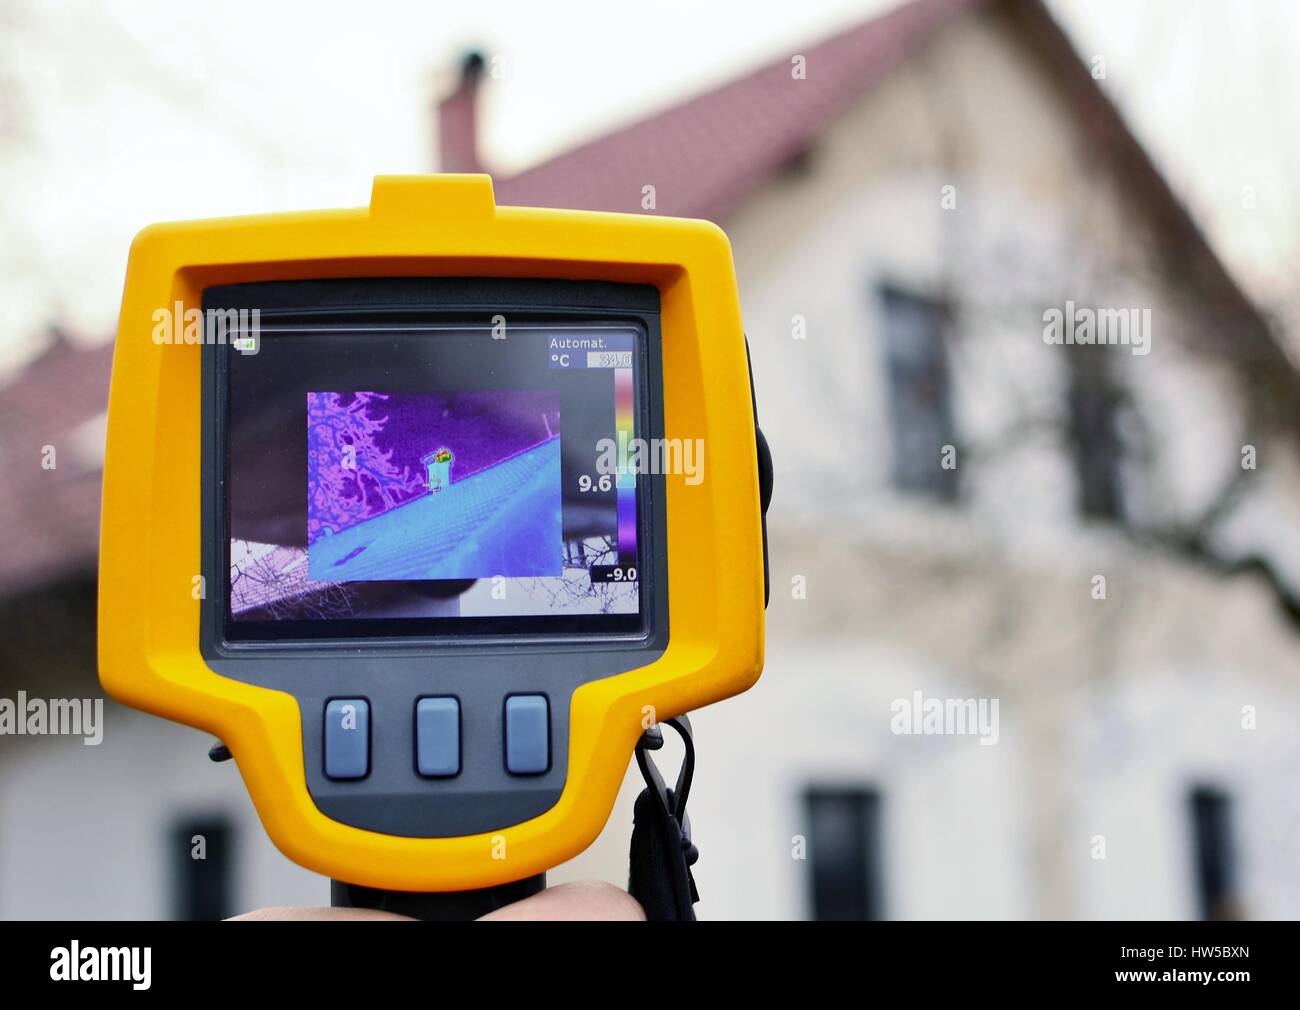 Recording Heat Loss of the Roof on the House with Infrared Thermal Camera in Hand. Stock Photo